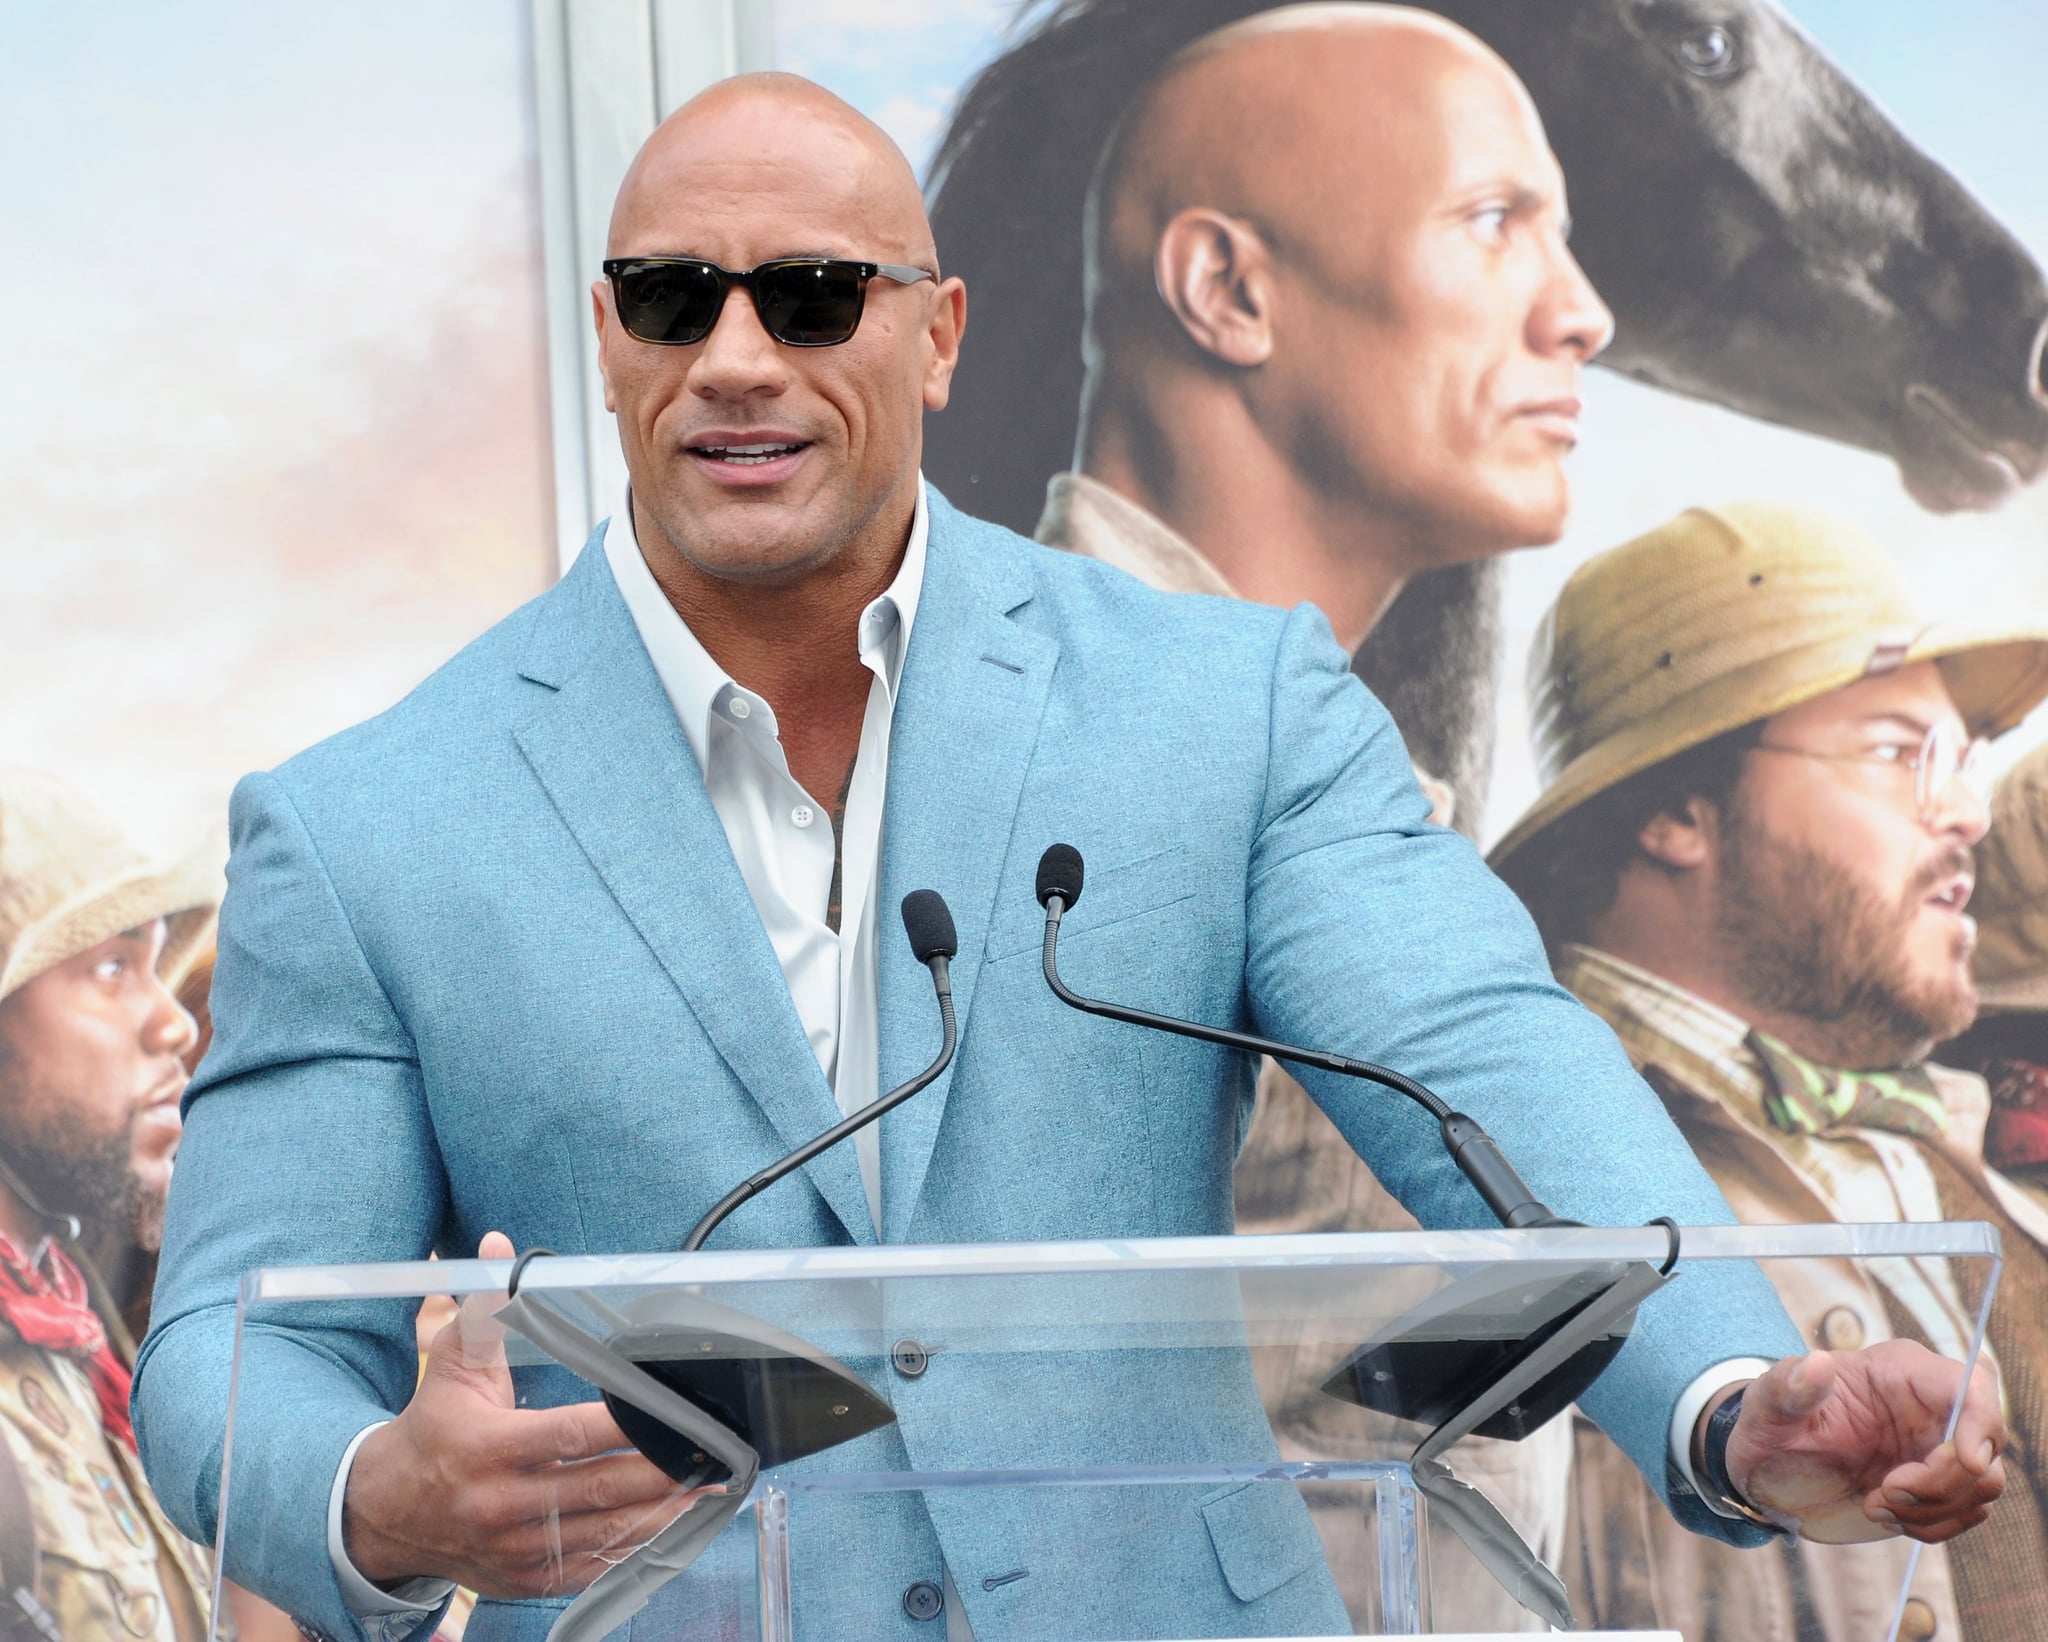 HOLLYWOOD, CA - DECEMBER 10:  Dwayne Johnson speaks at  Kevin Hart's Hand And Footprint Ceremony At the TCL Chinese Theatre IMAX held at TCL Chinese Theatre on December 10, 2019 in Hollywood, California.  (Photo by Albert L. Ortega/Getty Images)